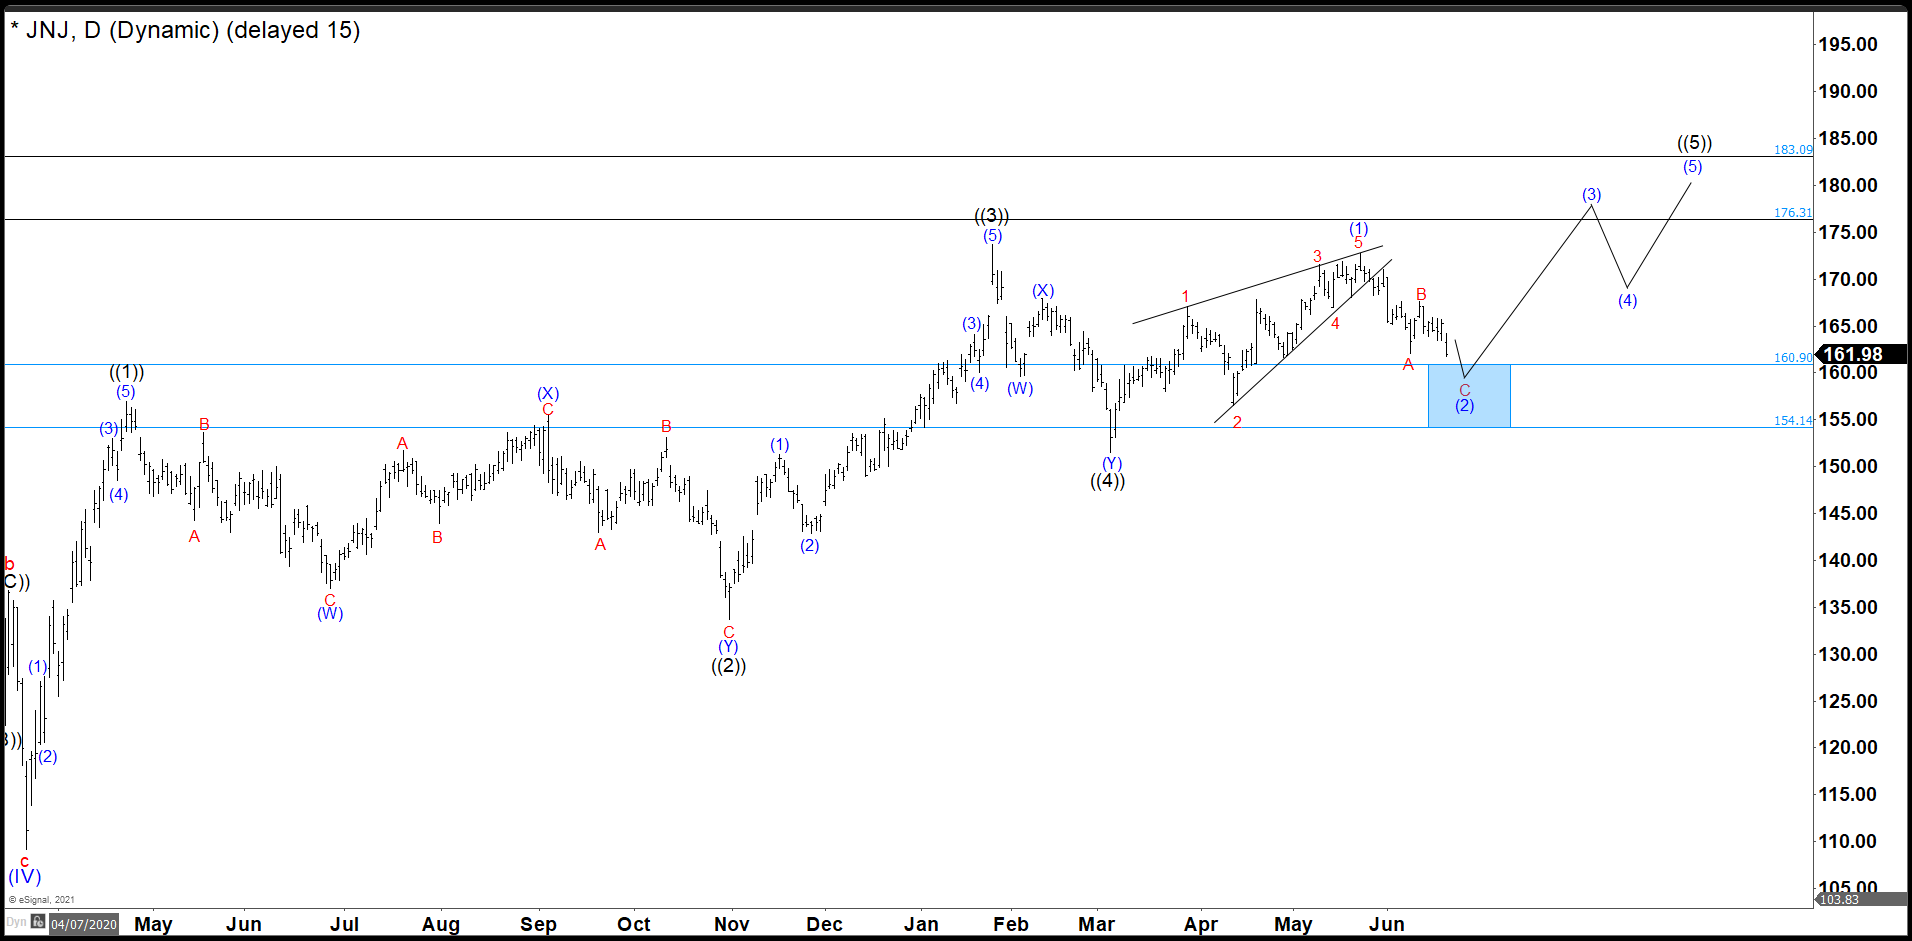 JNJ Is Ending An ABC Correction As Wave (2)